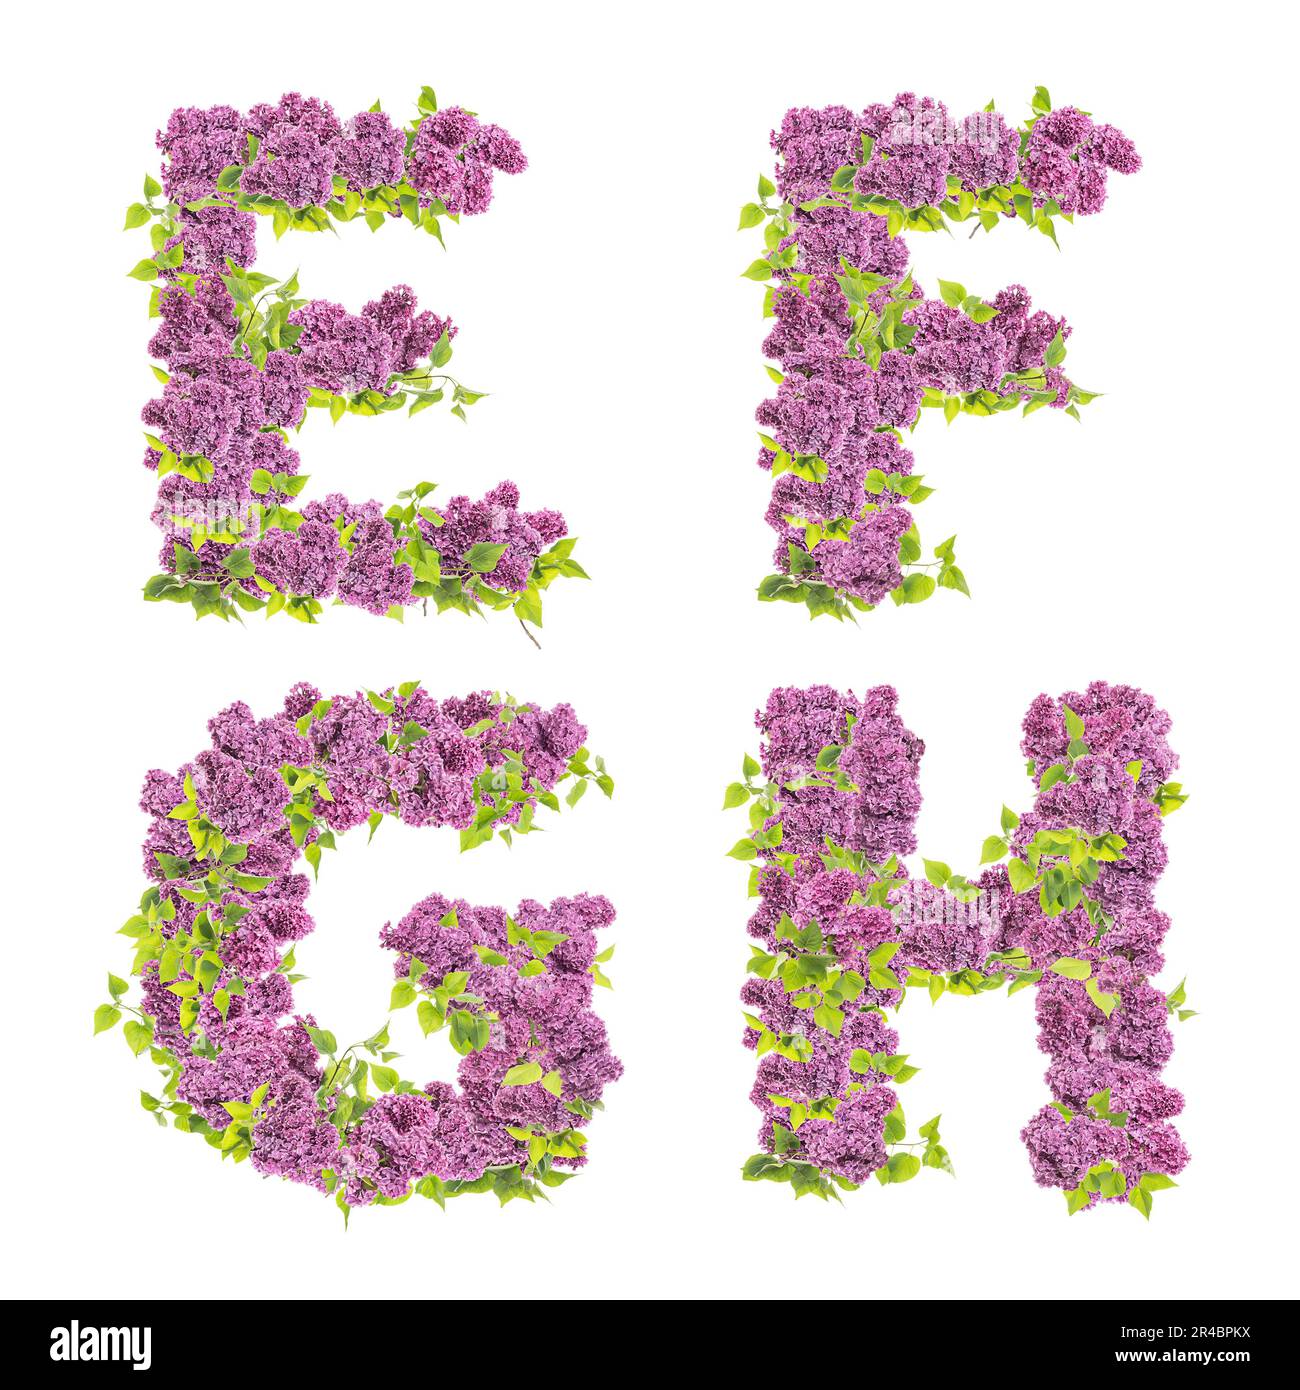 3D rendering of Lilac flowers capital letters alphabet - letters E-H Stock Photo